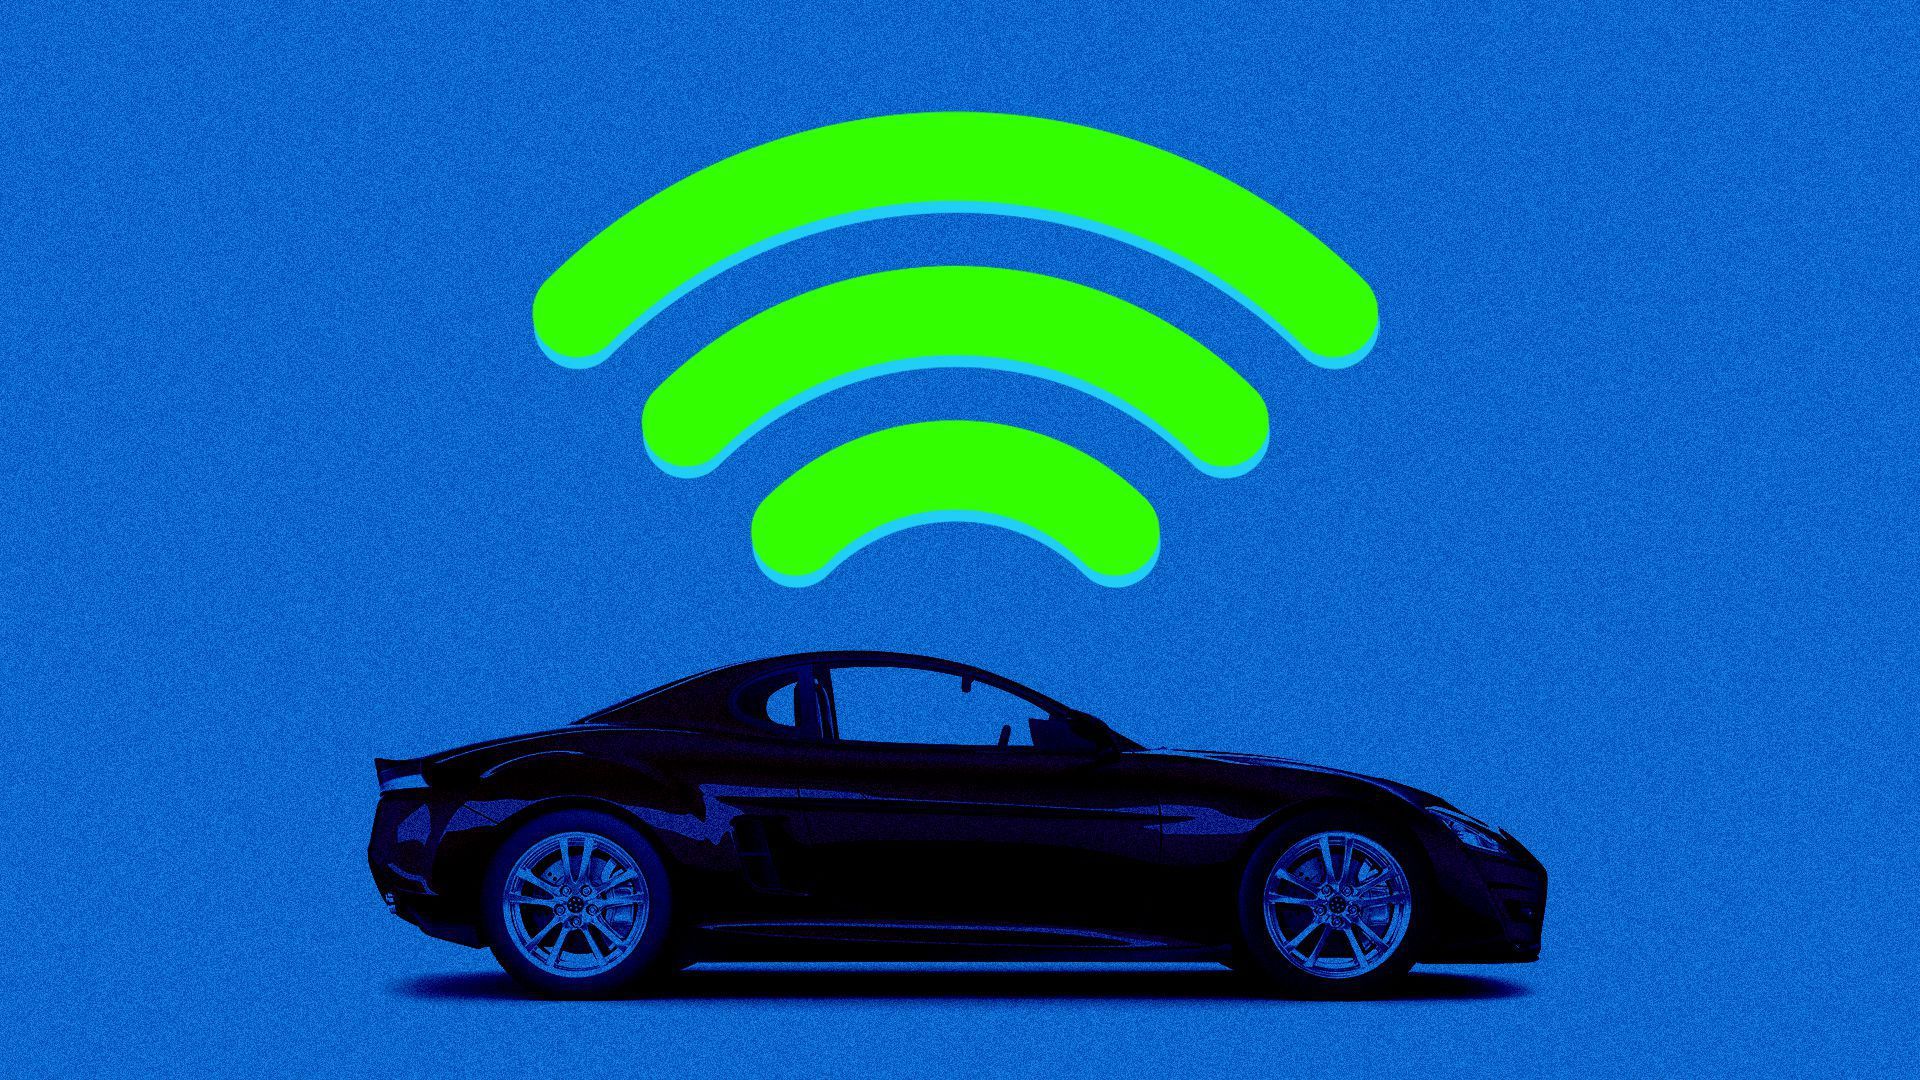 Illustration of WiFi signal over car